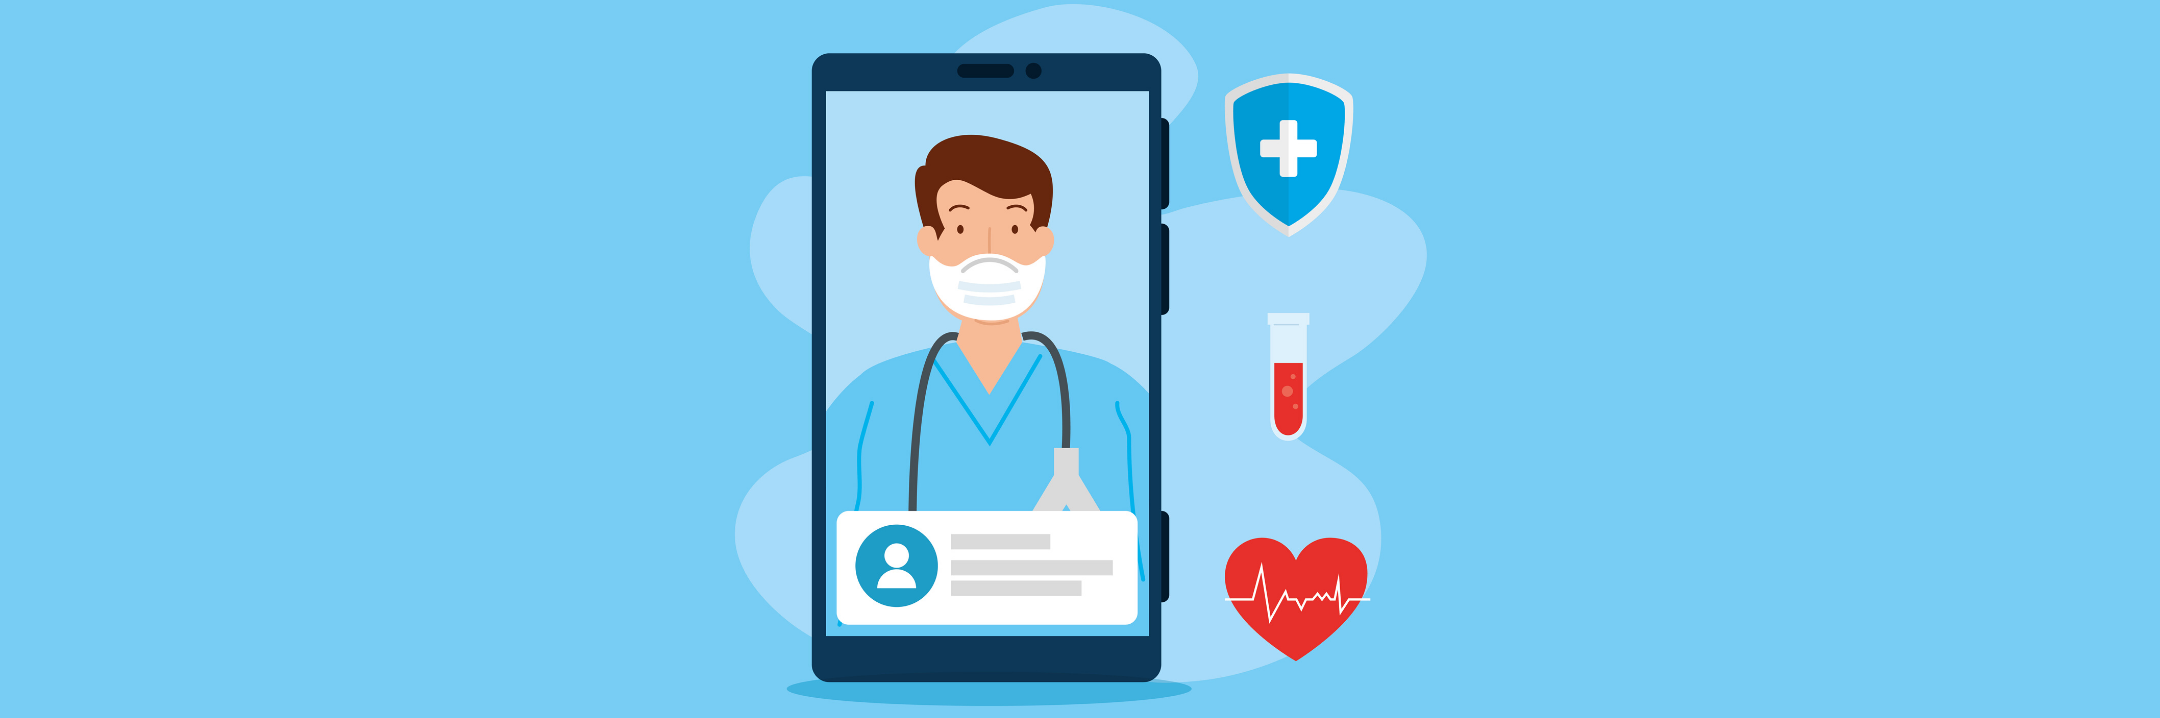 Virtual doctor visit with telemedicine